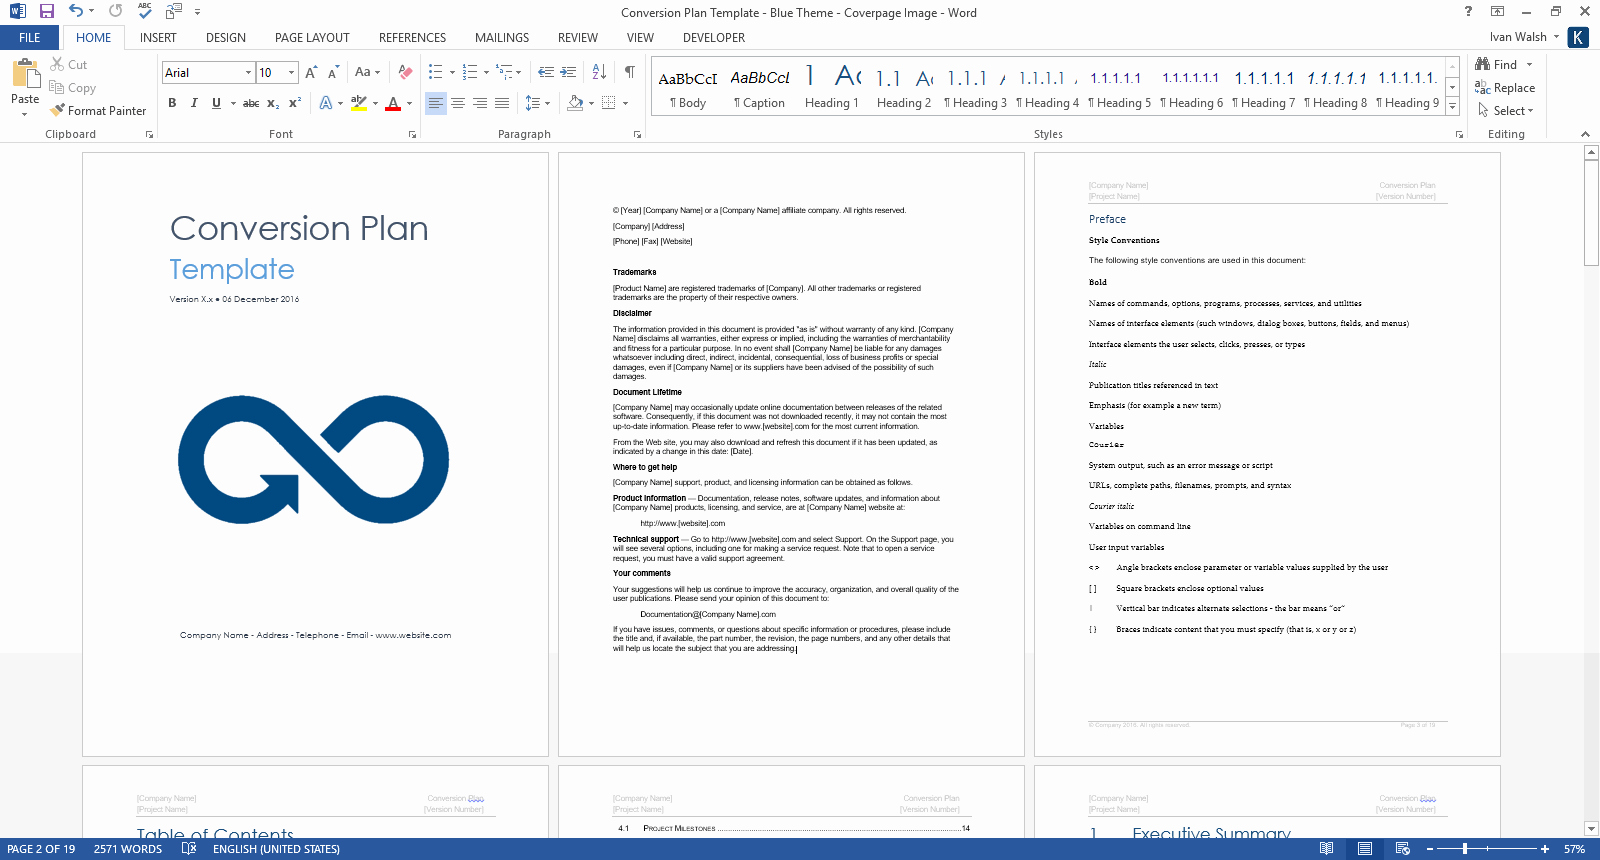 Test Plan Template Word New Conversion Plan Template – Download 19 Page Ms Word Sample